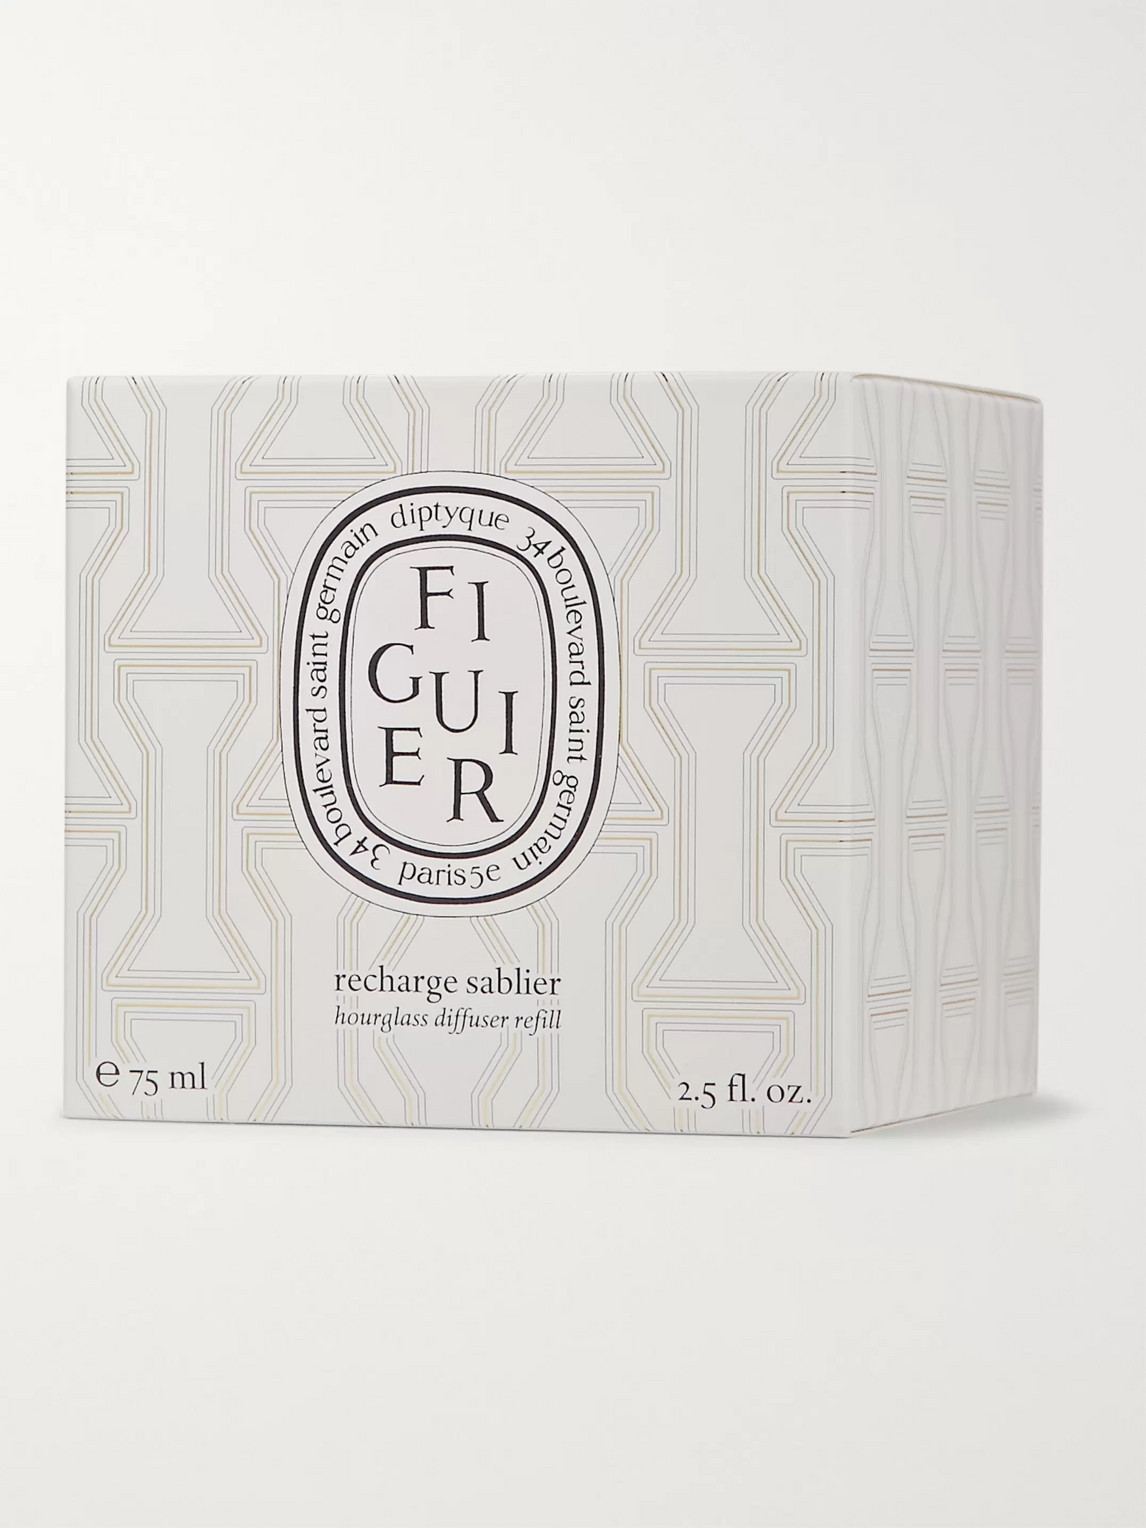 Diptyque Figuier Hourglass Diffuser Refill, 75ml In Colorless